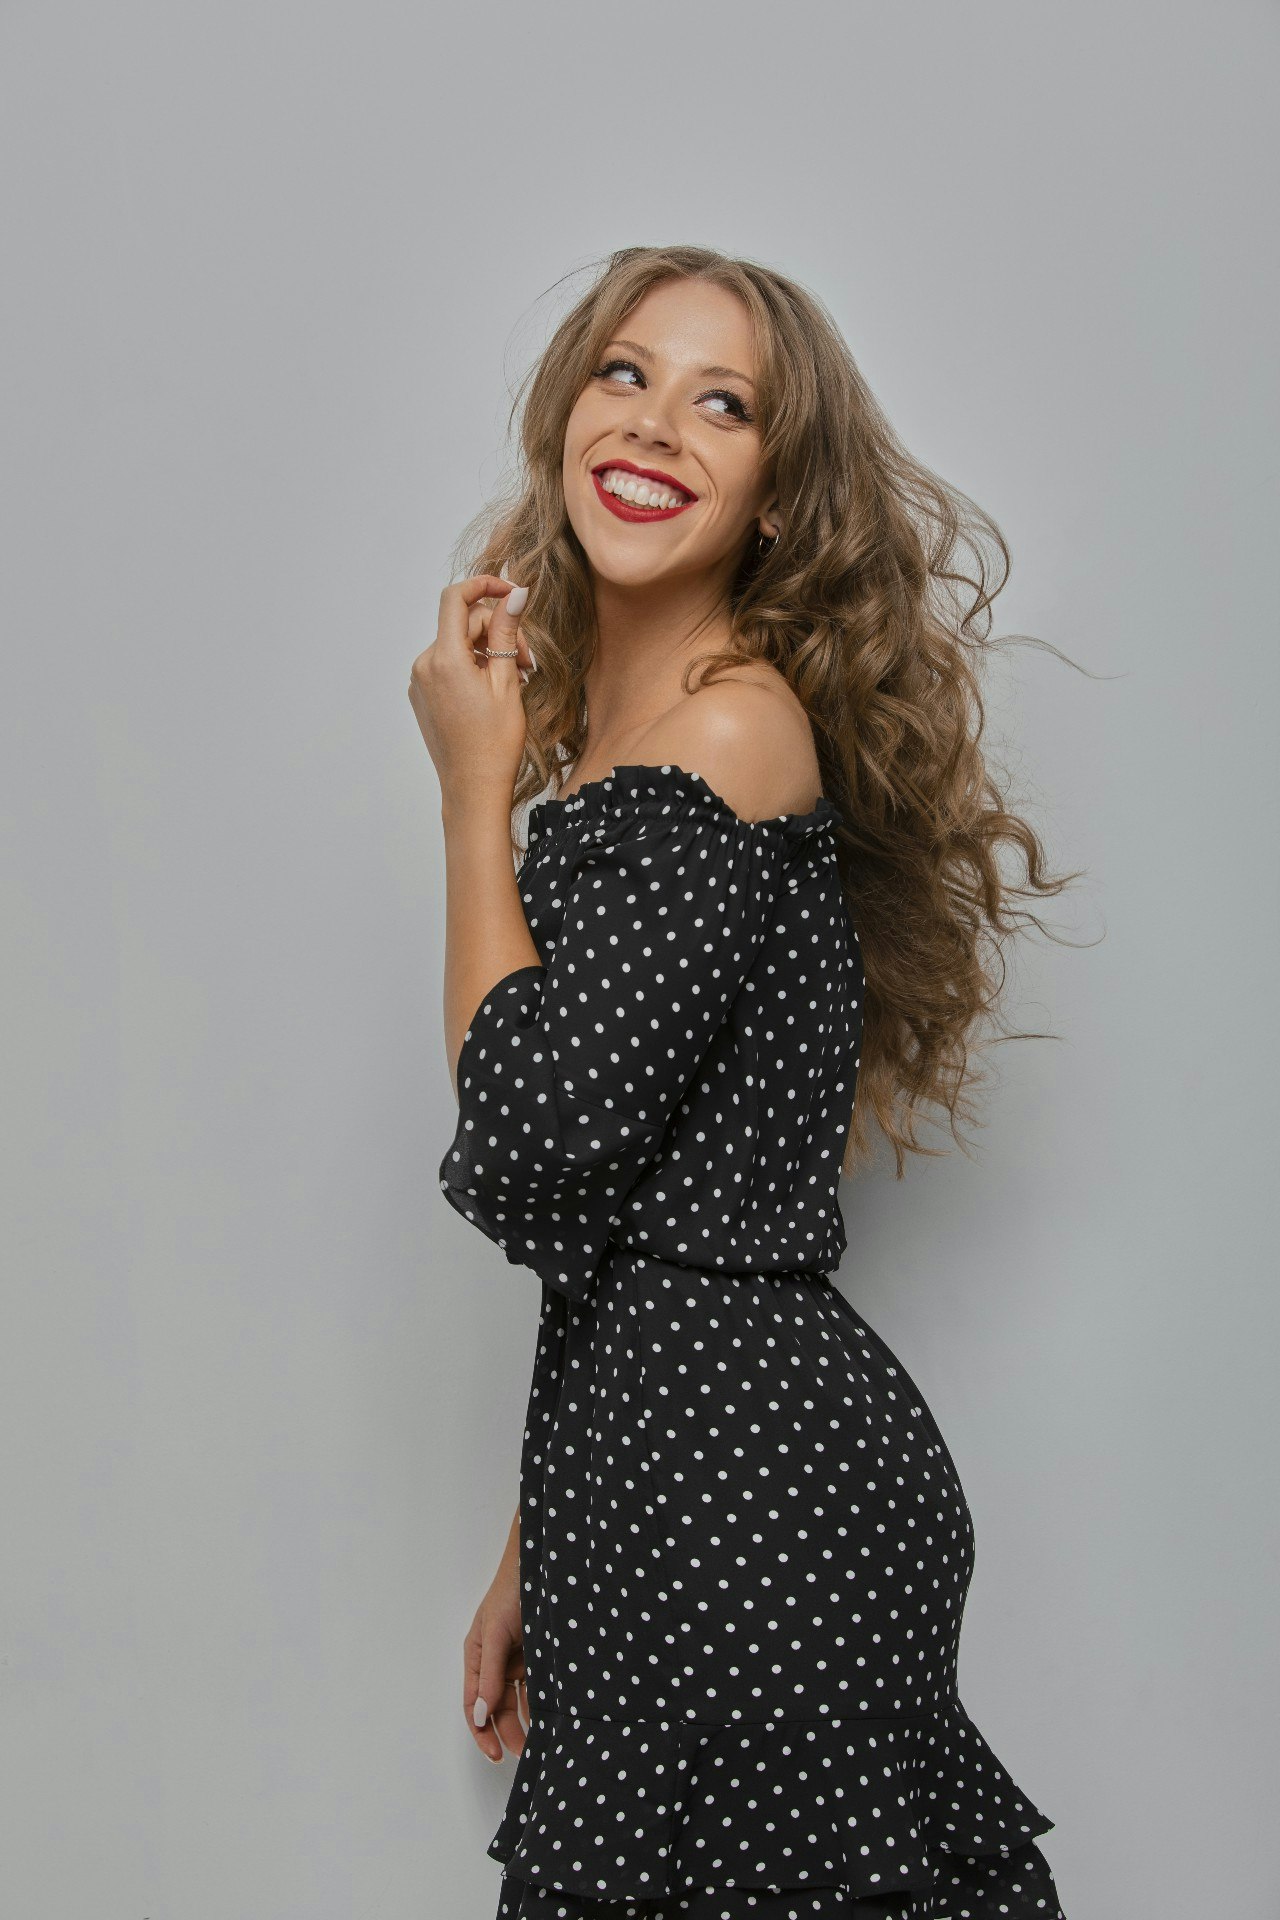 DJ Brittany Leo posing in a black dress with white polka dots